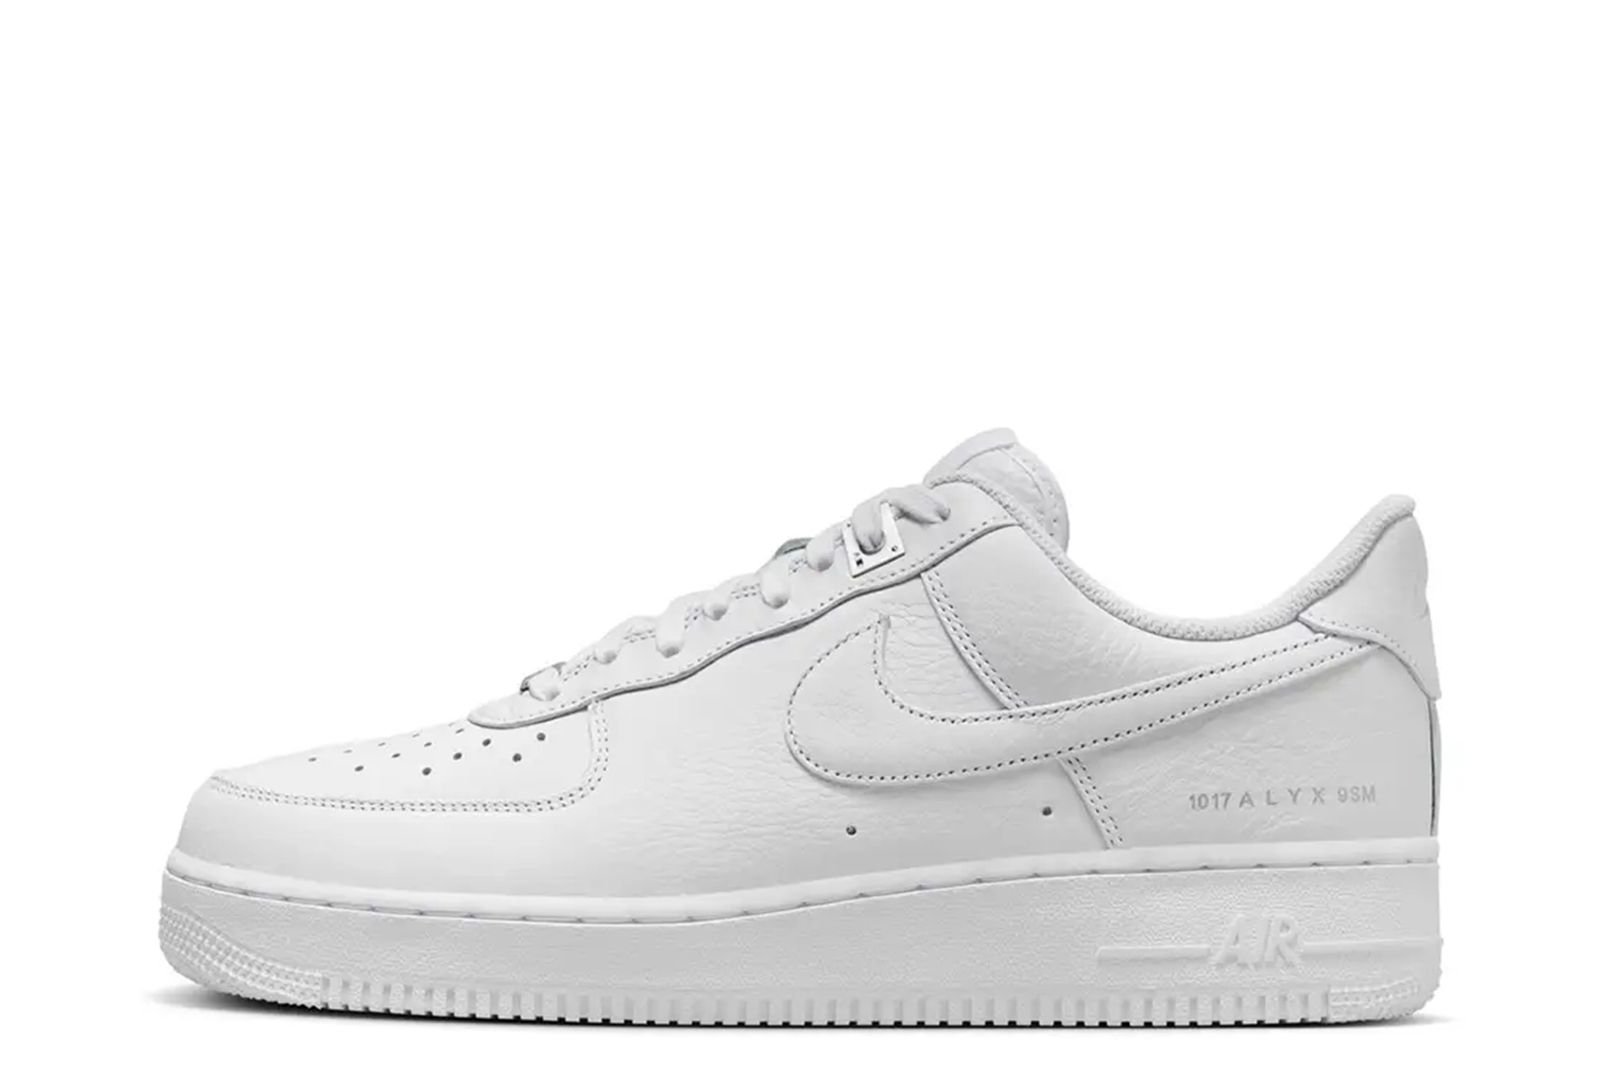 1017 ALYX 9SM x Nike Air Force 1 Low SP "White"